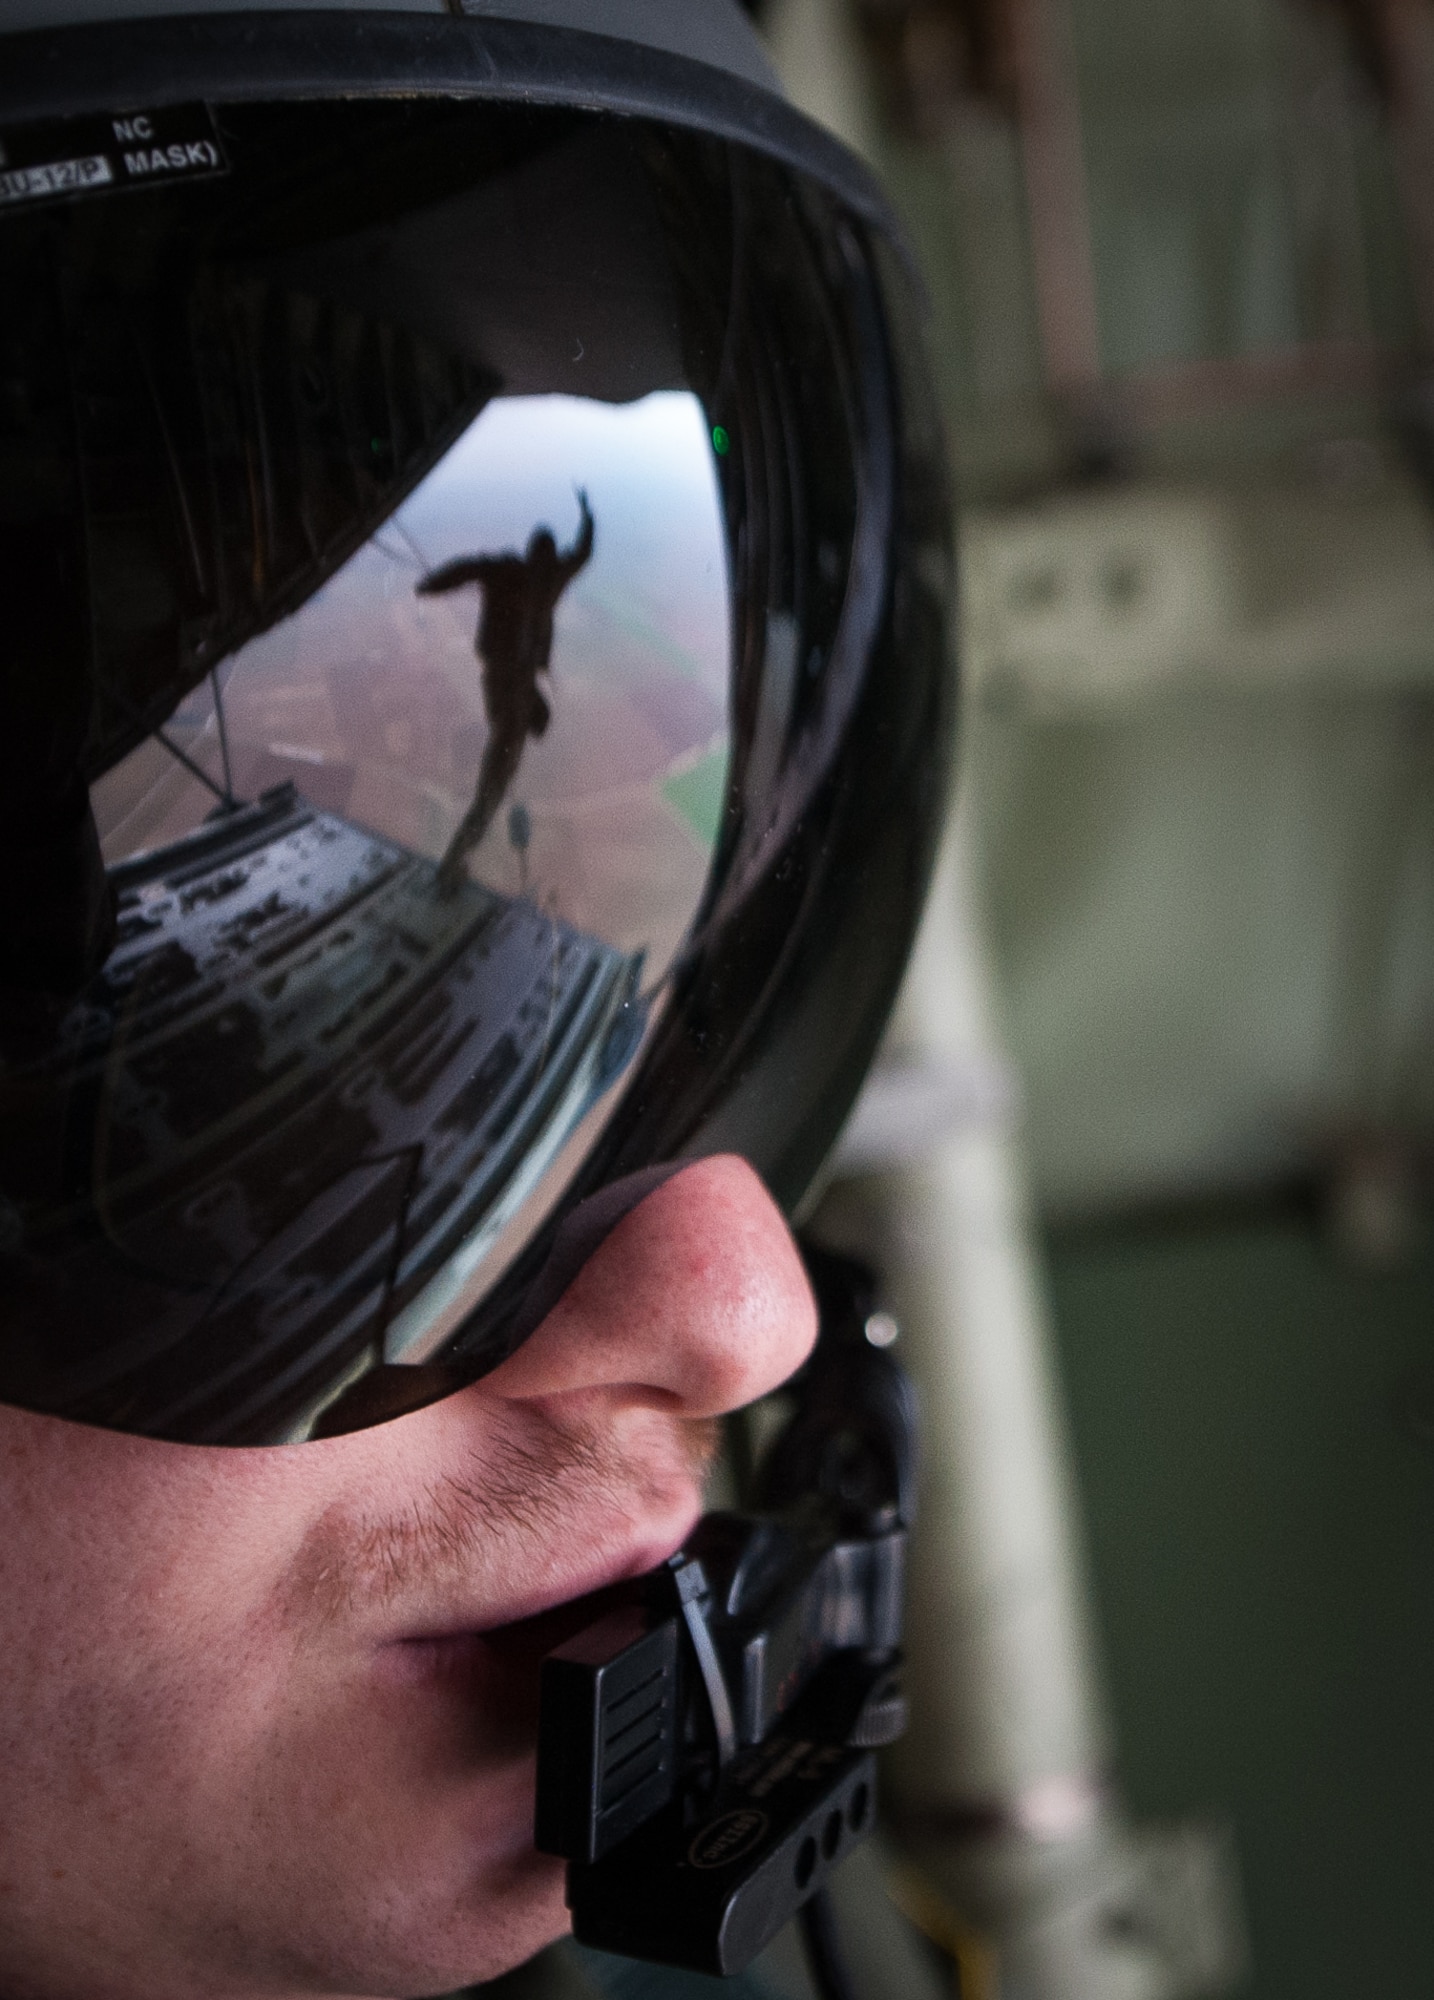 Senior Airman Patrick Cassidy, 37th Airlift Squadron loadmaster, observes as NATO allied nation paratroopers jump out of a C-130J Super Hercules during an International Jump Week exercise over Germany Dec. 1, 2016. Cassidy and the rest of the crew, stationed at Ramstein Air Base, assisted in the exercise by providing aircraft for the paratroopers to jump from. (U.S. Air Force photo by Airman 1st Class Lane T. Plummer)